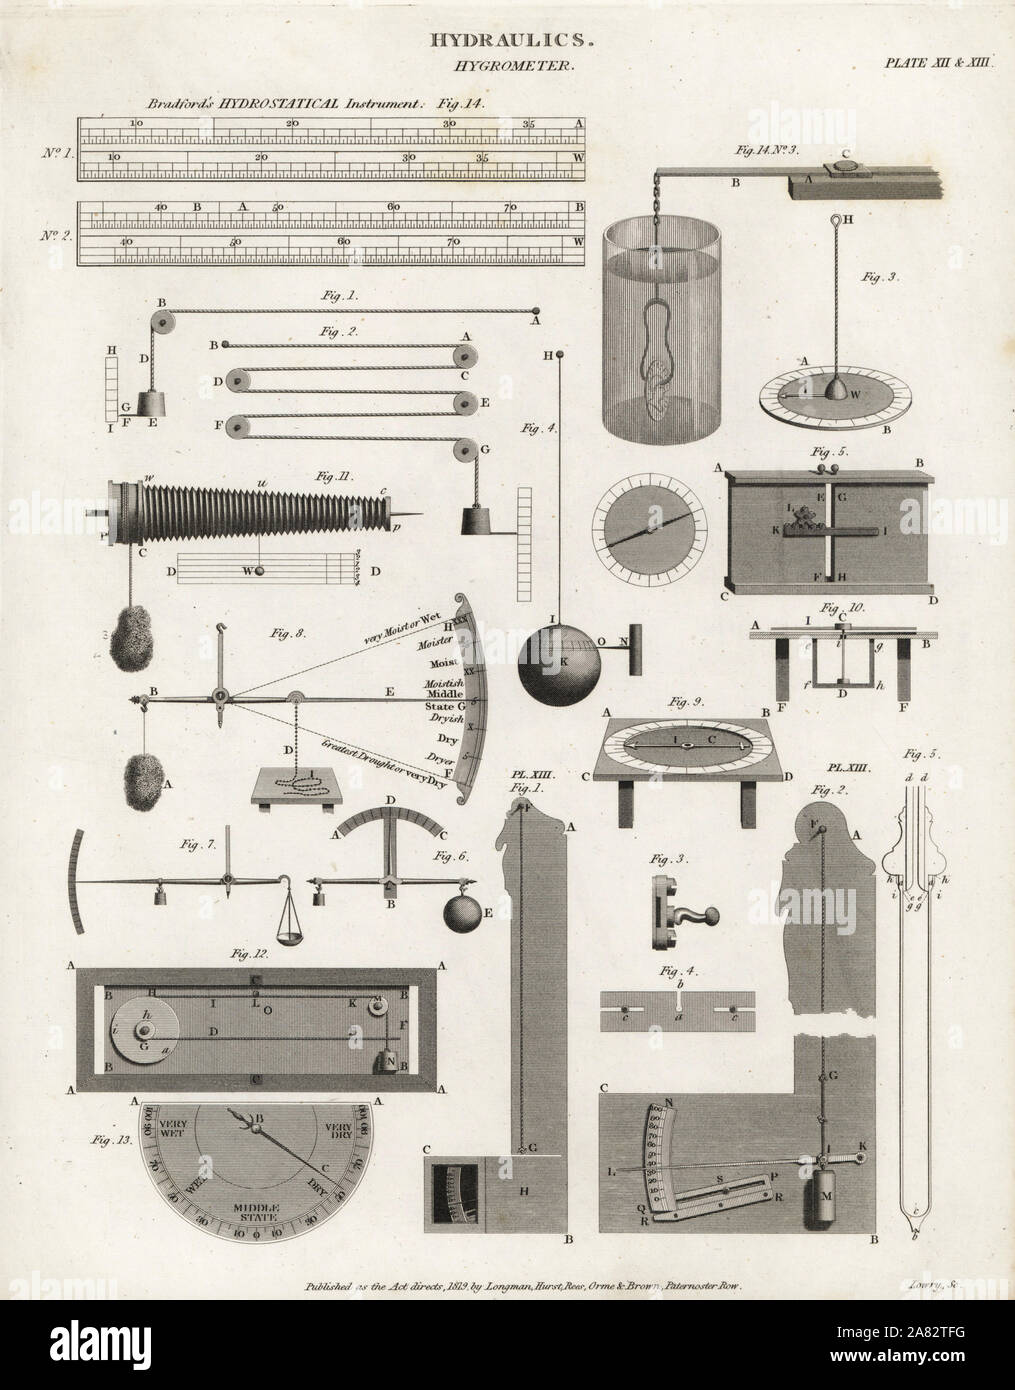 Types of hygrometers, 18th century, to measure moisture content by Anderson 8, Dr. Robert Hooke 9,10, Dr. Hale 11, James Ferguson 12,13, and Bradford's hydrostatical instrument for weighing coin and checking weight and purity 1-3. Copperplate engraving by Wilson Lowry from Abraham Rees' Cyclopedia or Universal Dictionary of Arts, Sciences and Literature, Longman, Hurst, Rees, Orme and Brown, London, 1819. Stock Photo